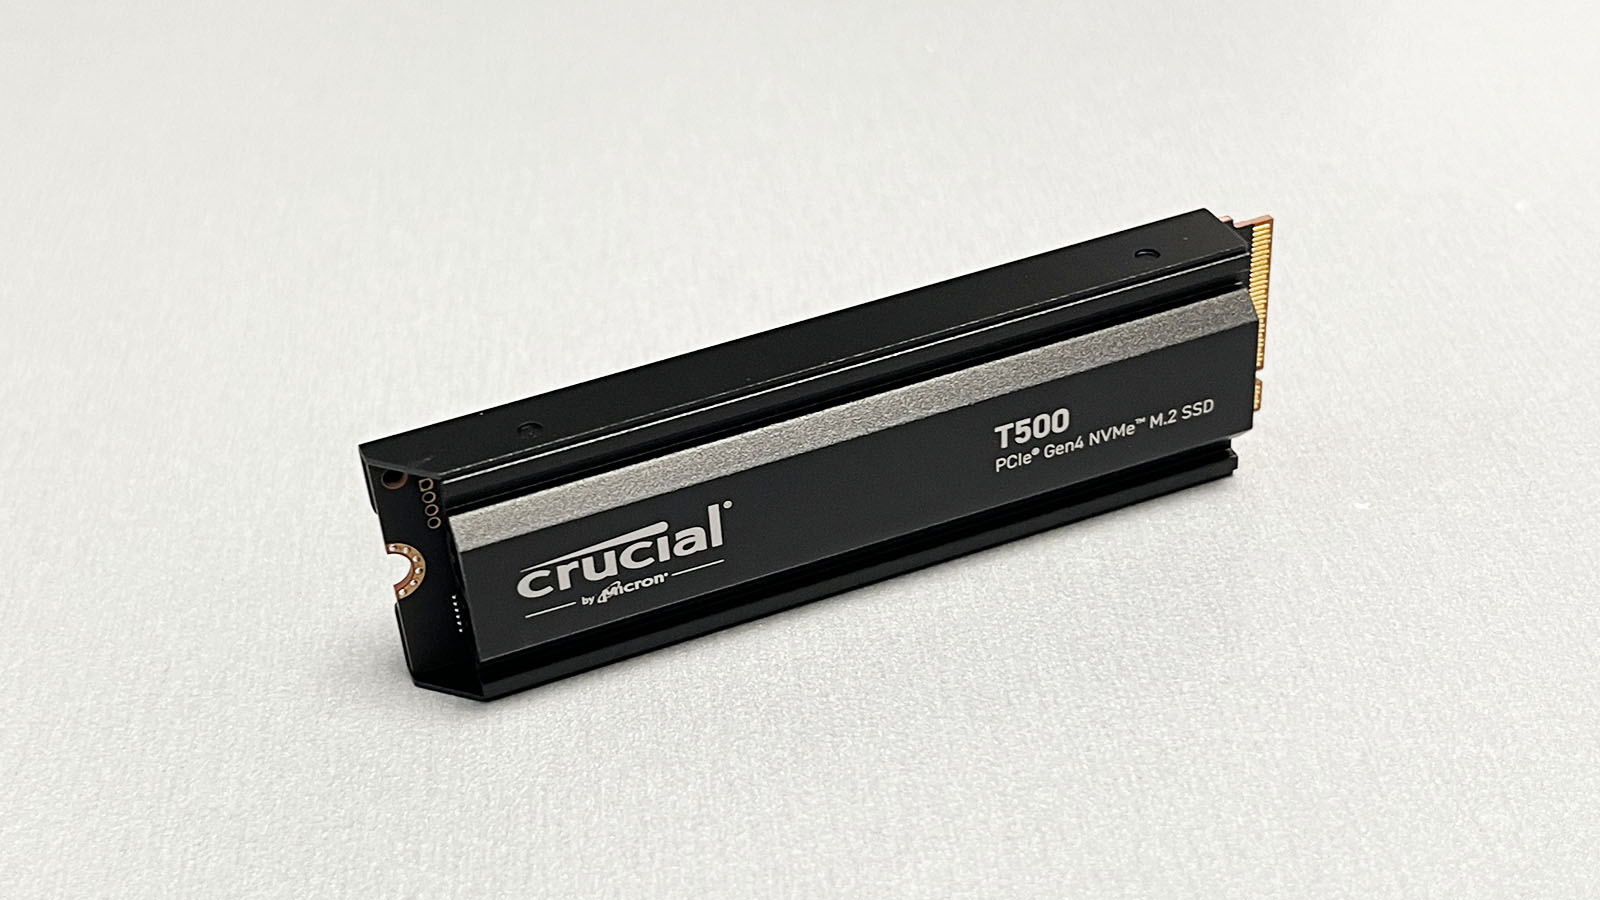 Crucial T500 2TB M.2 NVMe PCIe 4.0 SSD/Solid State Drive with Heatsink